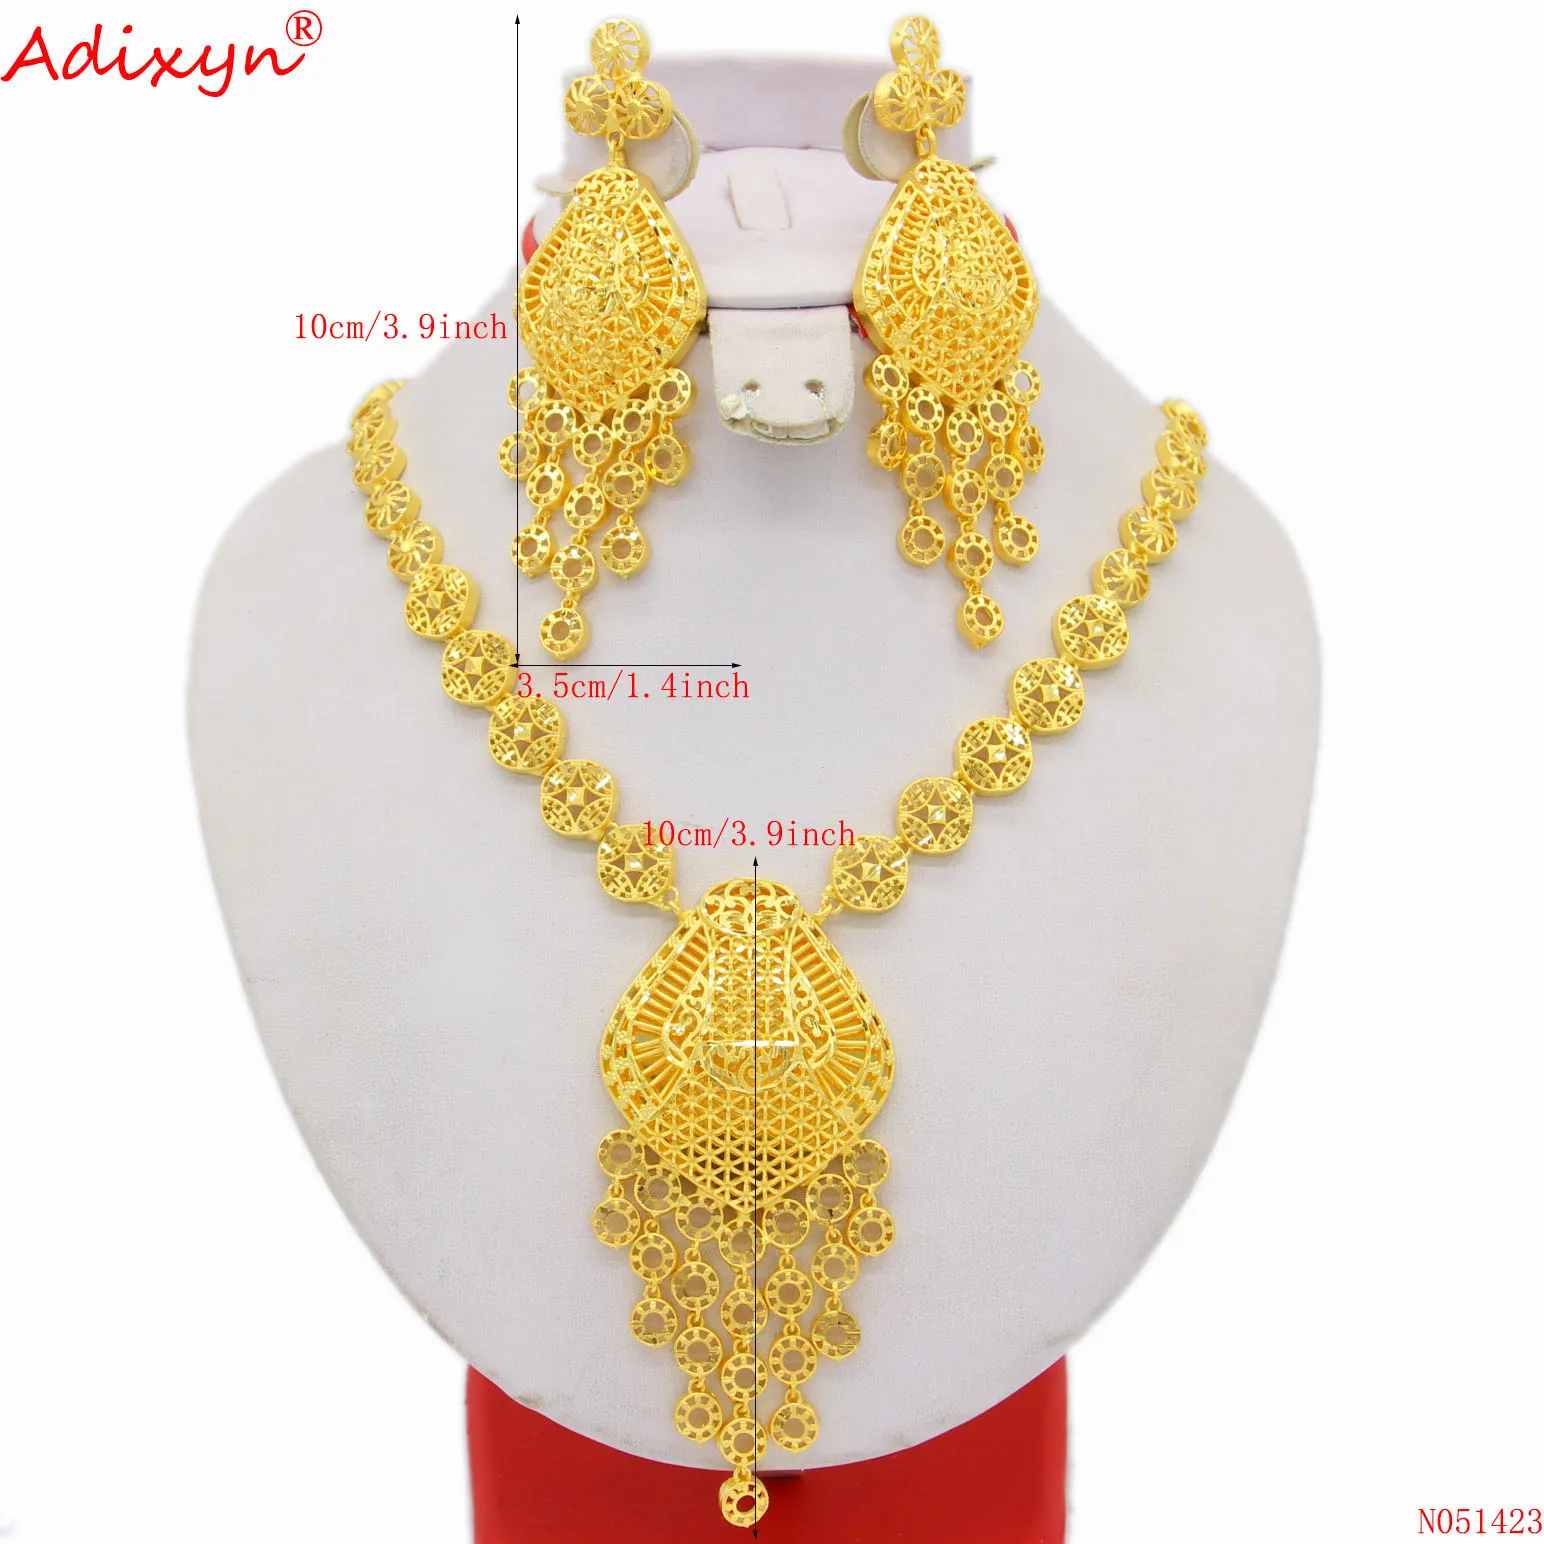 Adixyn Fine Jewelry Collares Necklace Earrings Jewelry set 24k Gold Color African Jewelry for Women Ornament Wedding Gifts